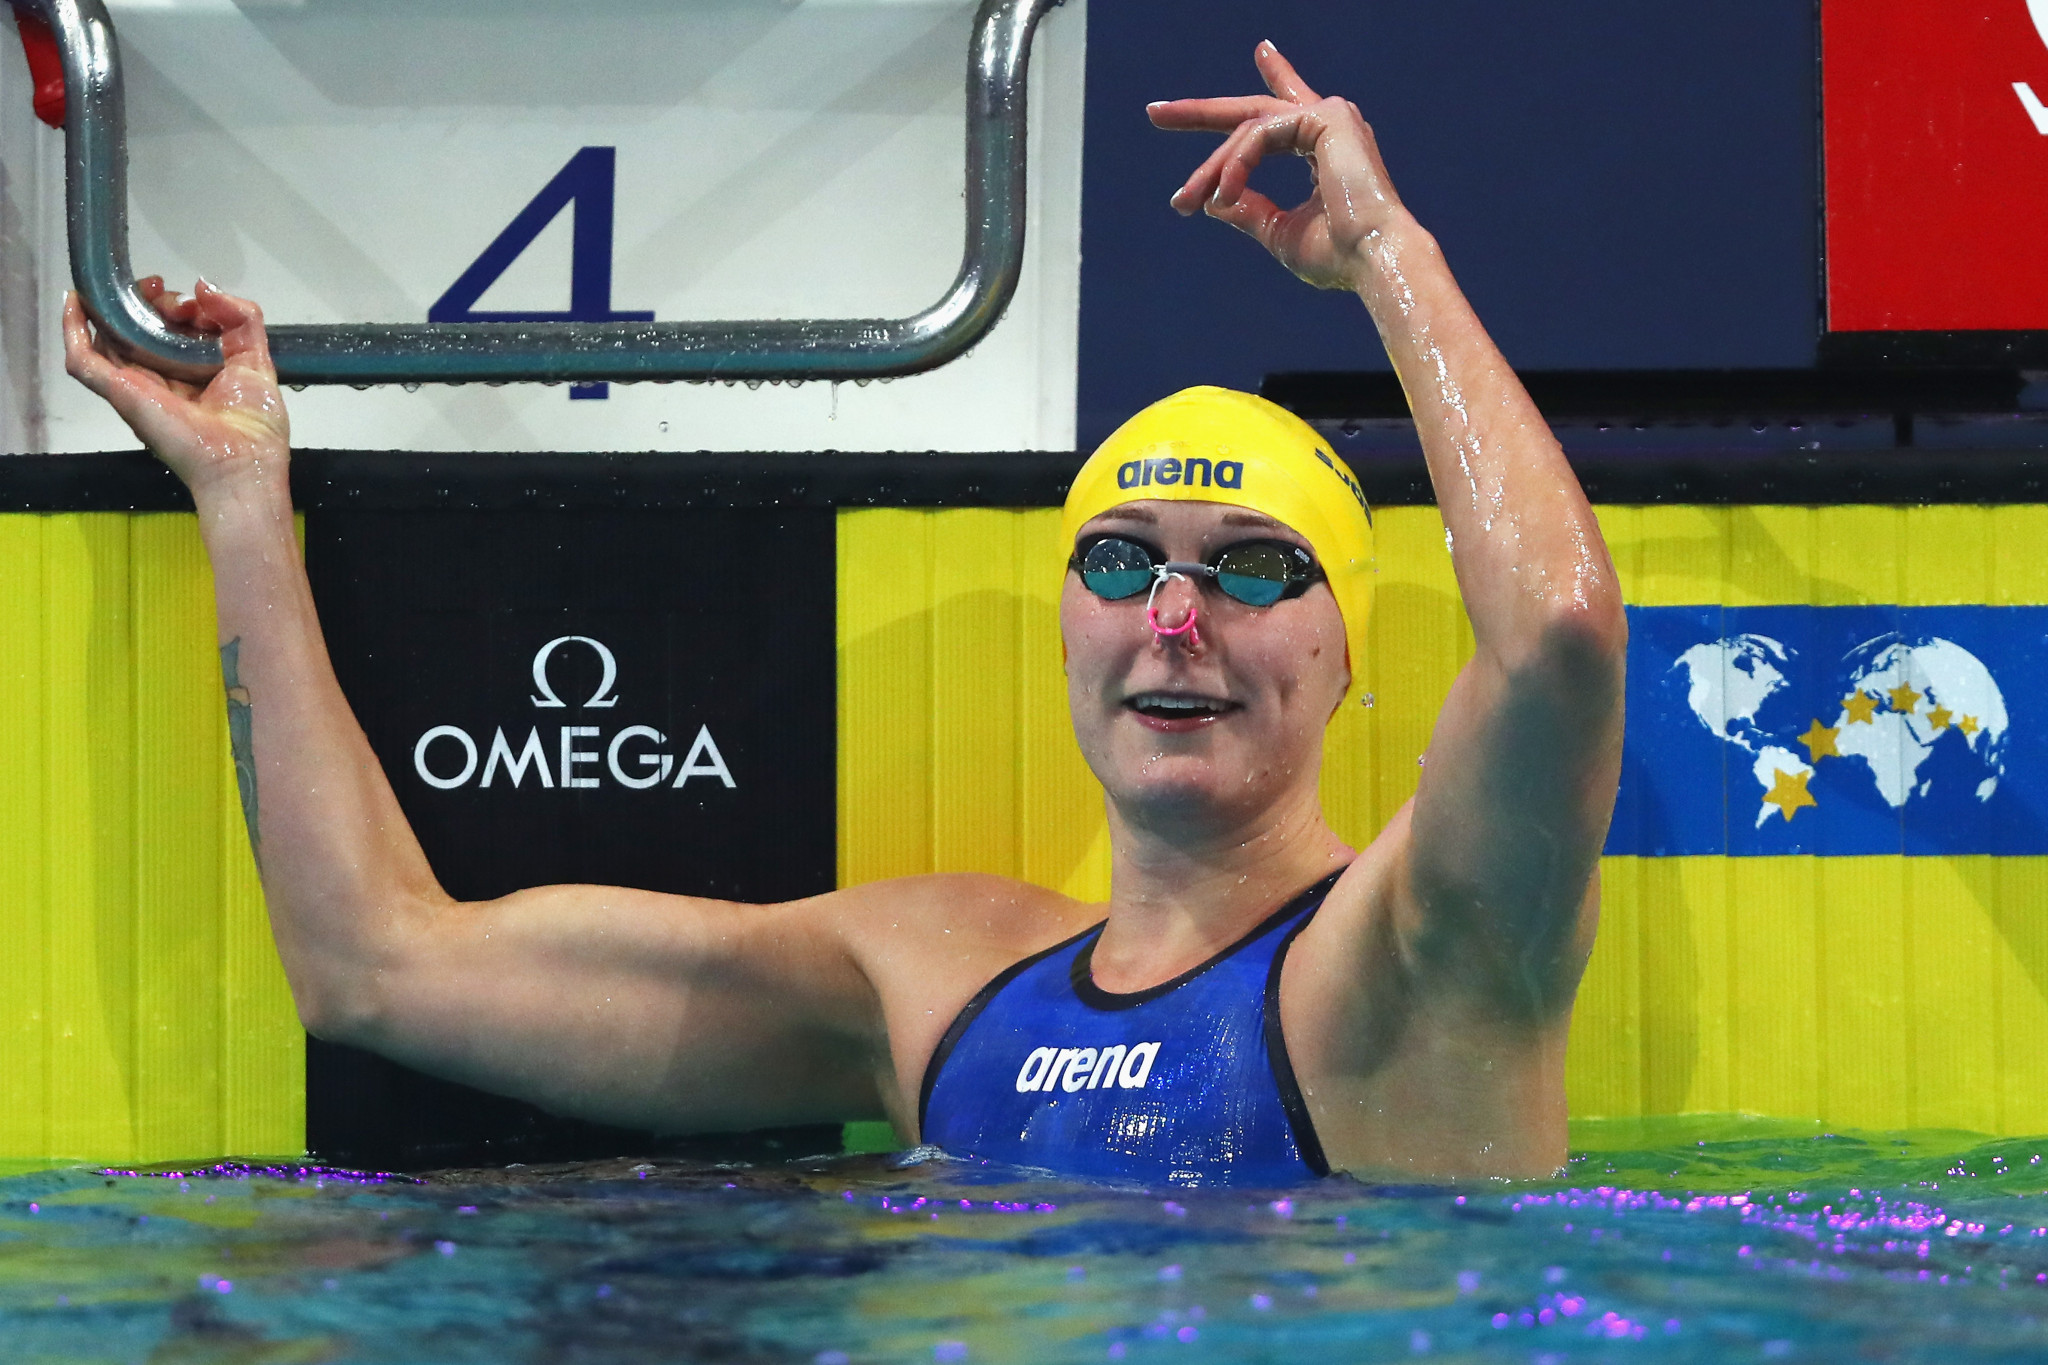 Another record breaking performance from Sjostrom at Eindhoven FINA World Cup 